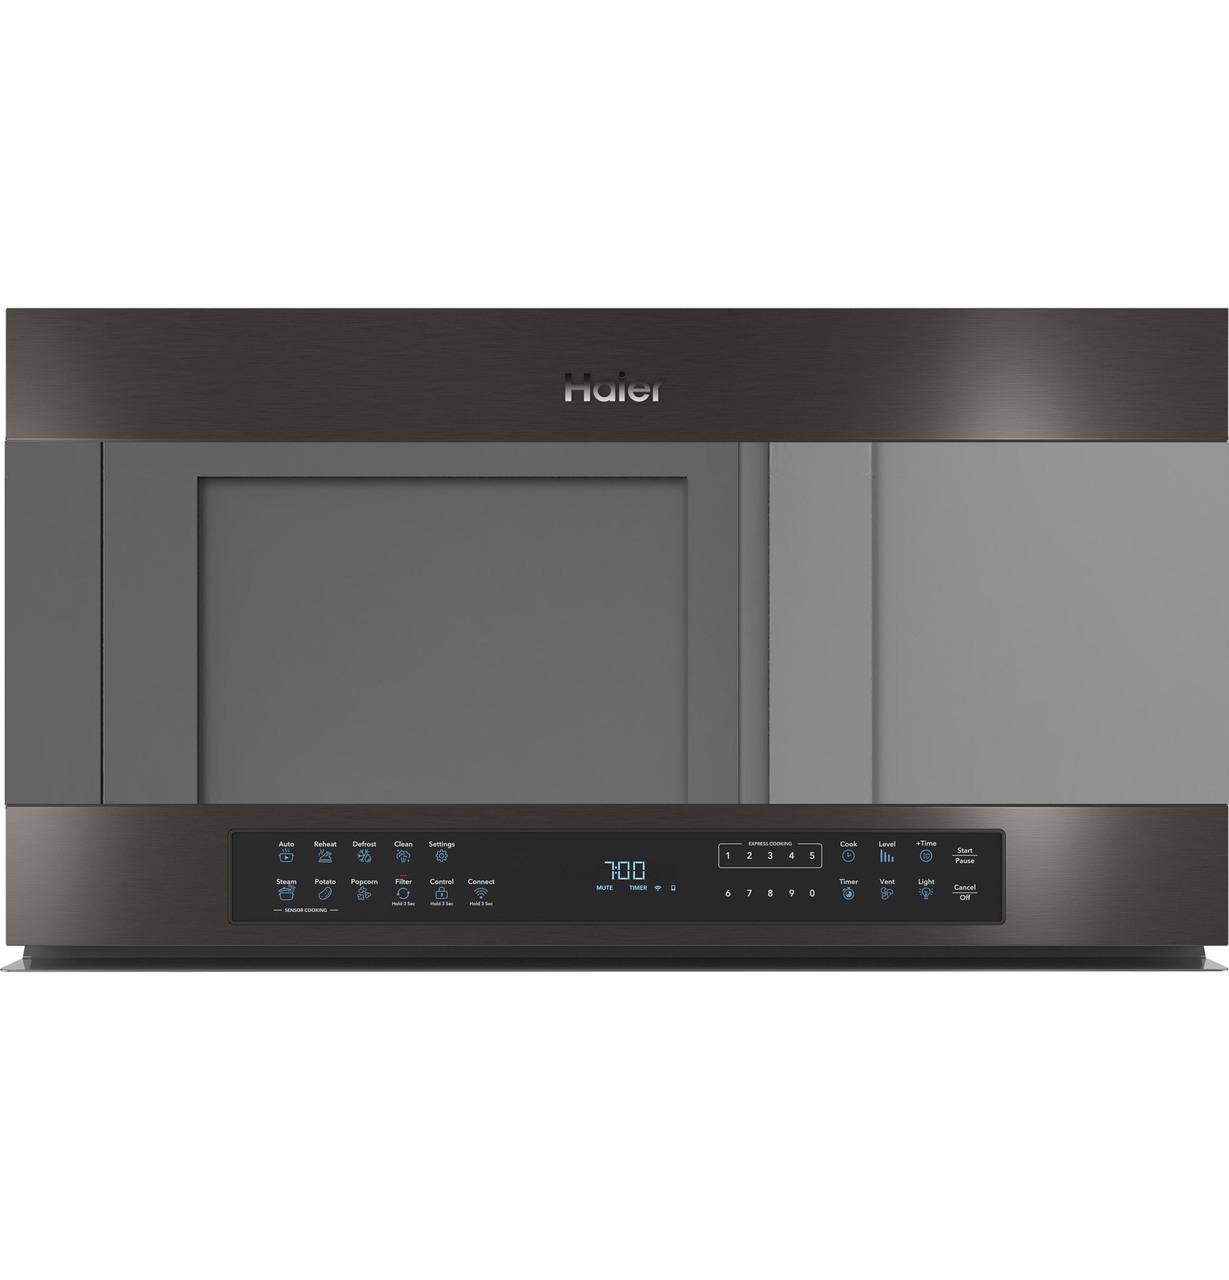 Haier 30" 1.6 Cu. Ft. Smart Over-the-Range Microwave Oven